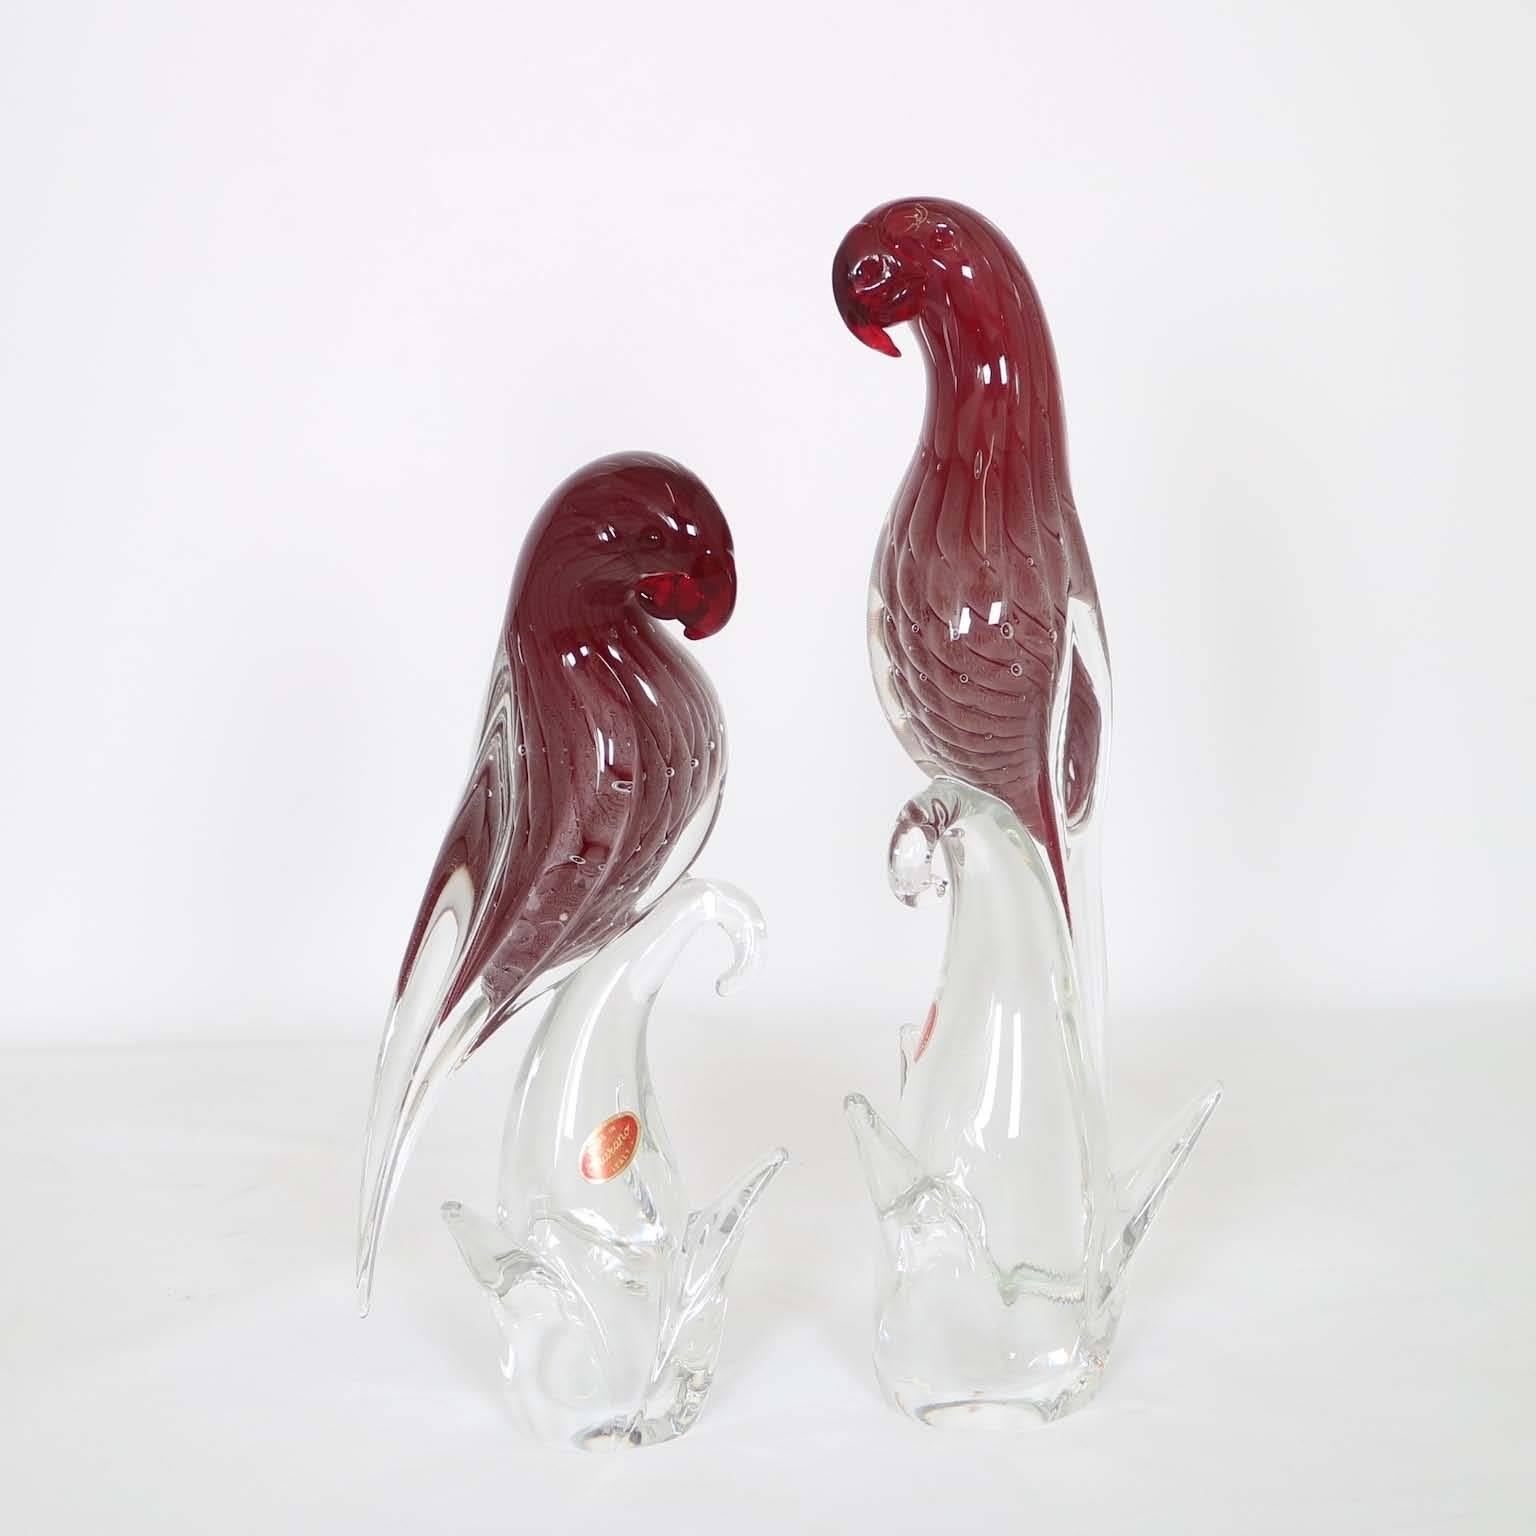 A beautiful pair of Murano glass parrot birds by Barbini, produced in Italy, circa 1950s, each in deep amethyst color with clear Sommerso layers. Markings include original labels. Excellent vintage condition.

Individual dimensions:
Tall: 14” H x